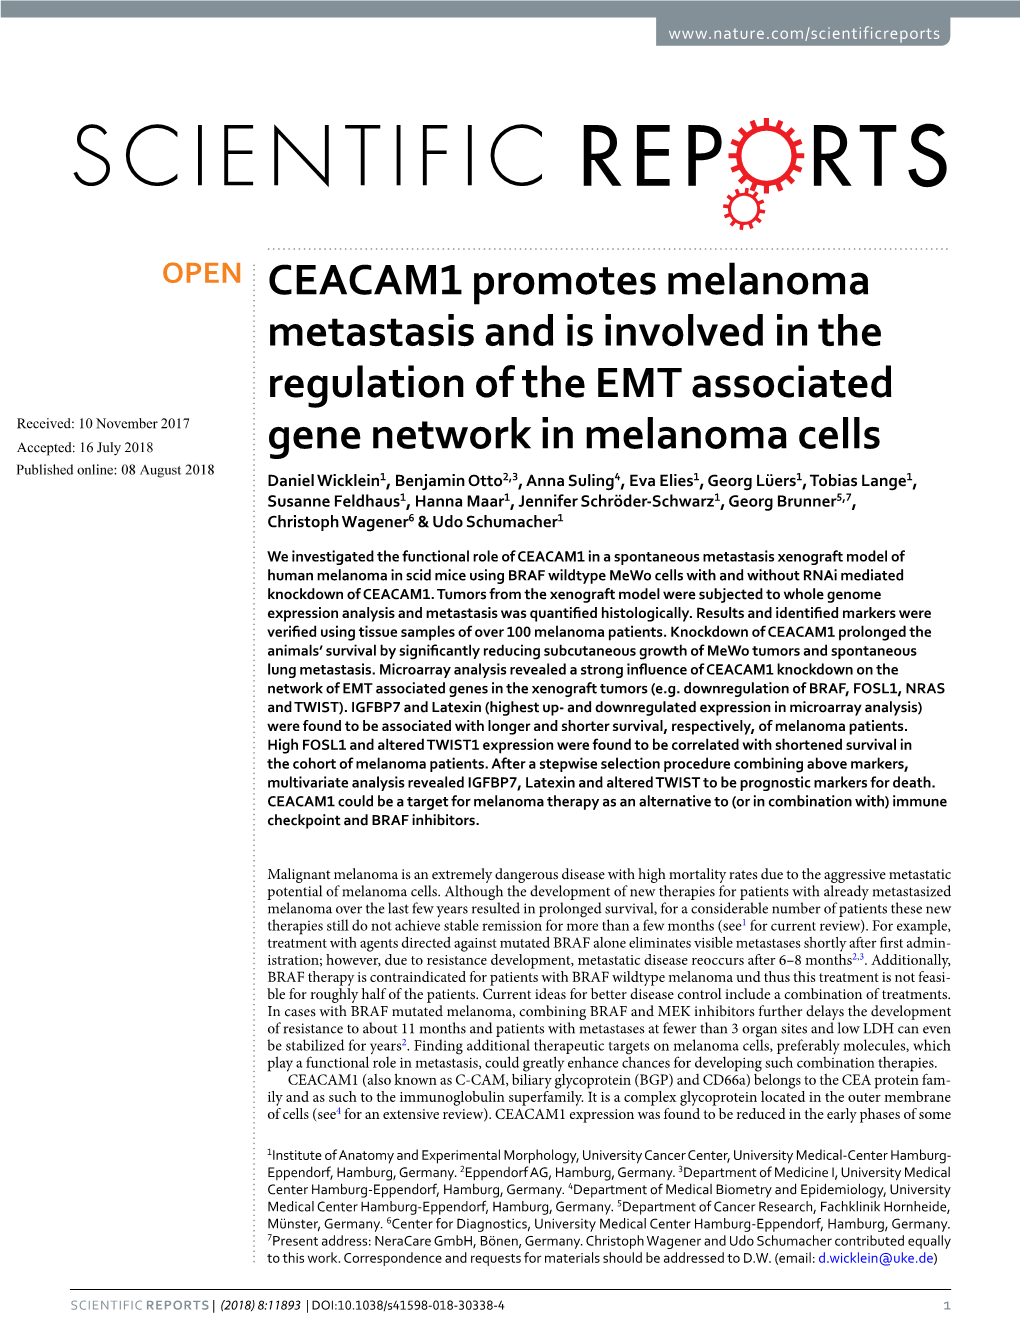 CEACAM1 Promotes Melanoma Metastasis and Is Involved in The